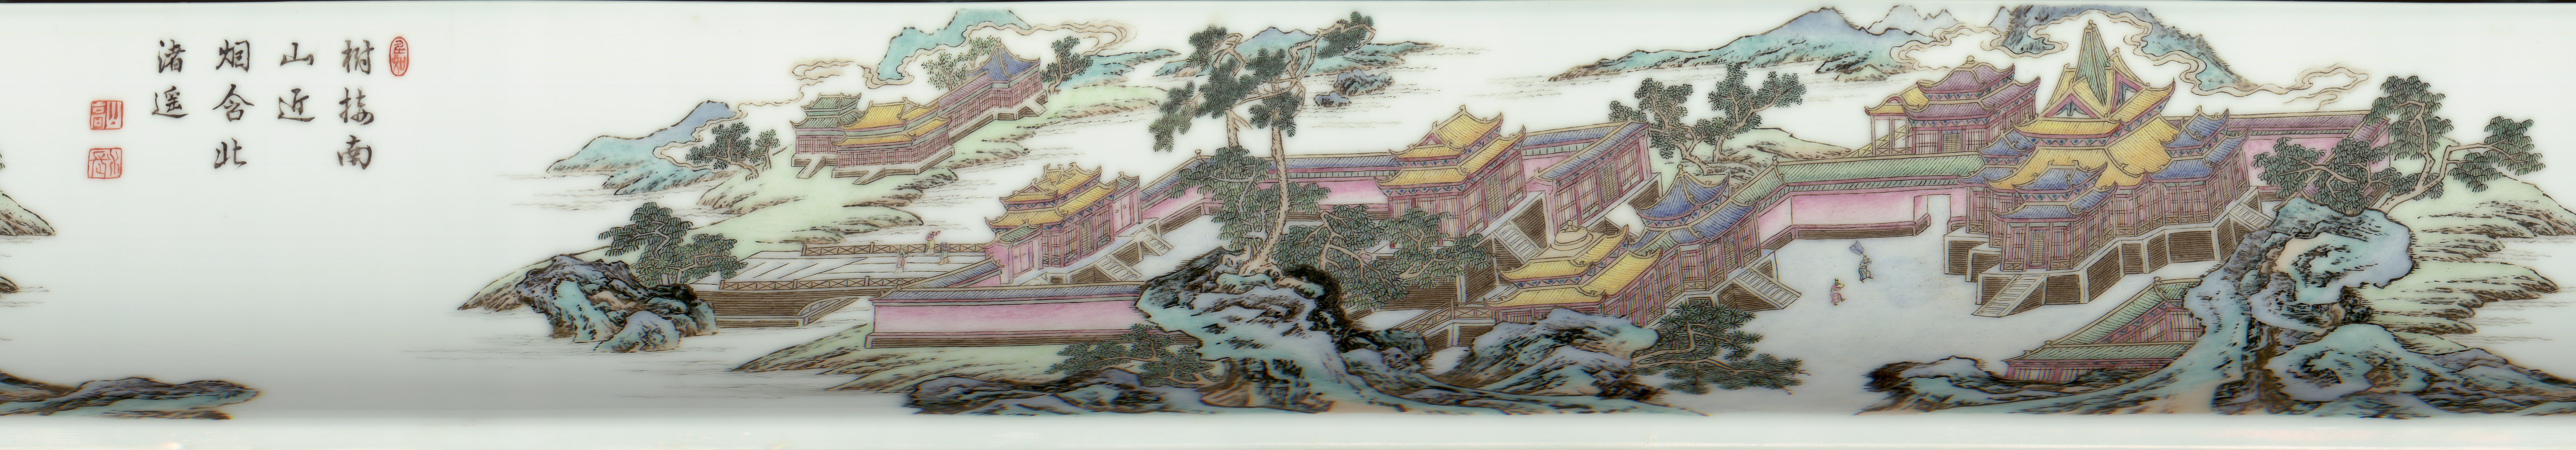 Bowl with landscape and pavilion in falangcai painted enamels